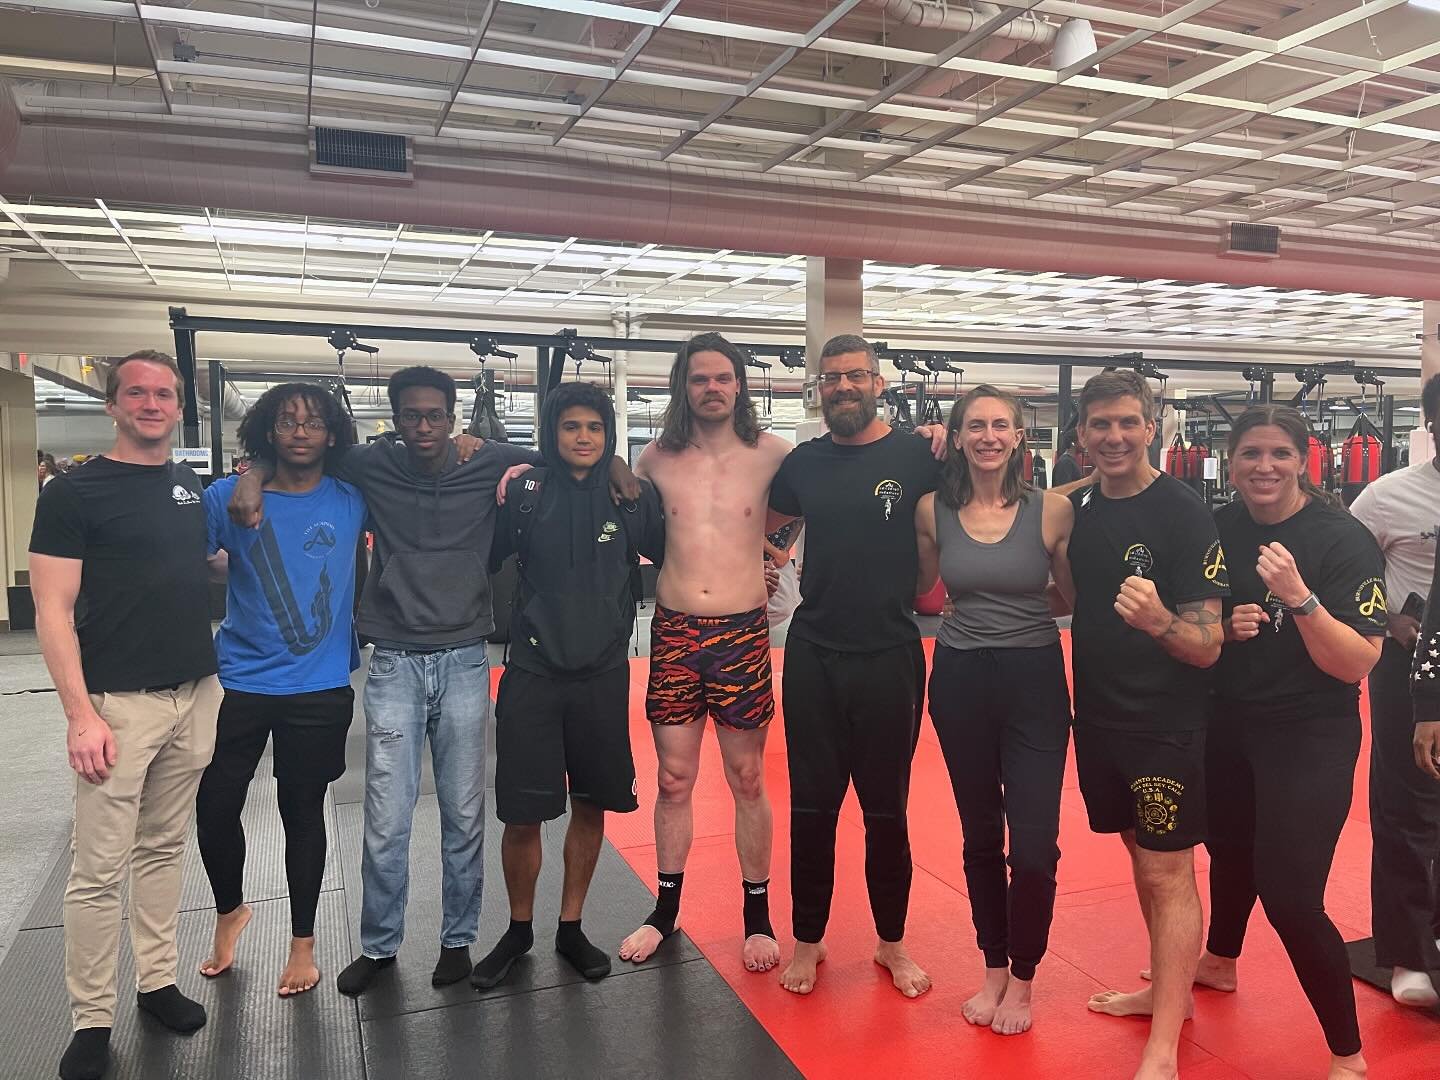 Shout out to everyone that competed in the Muay Thai scrimmages this past weekend at @thecellargym. You all did outstanding! Thank you to all the students who came out to corner and support the team!
.
.
.
#muaythai #fights @fighters #thaiboxing #kic